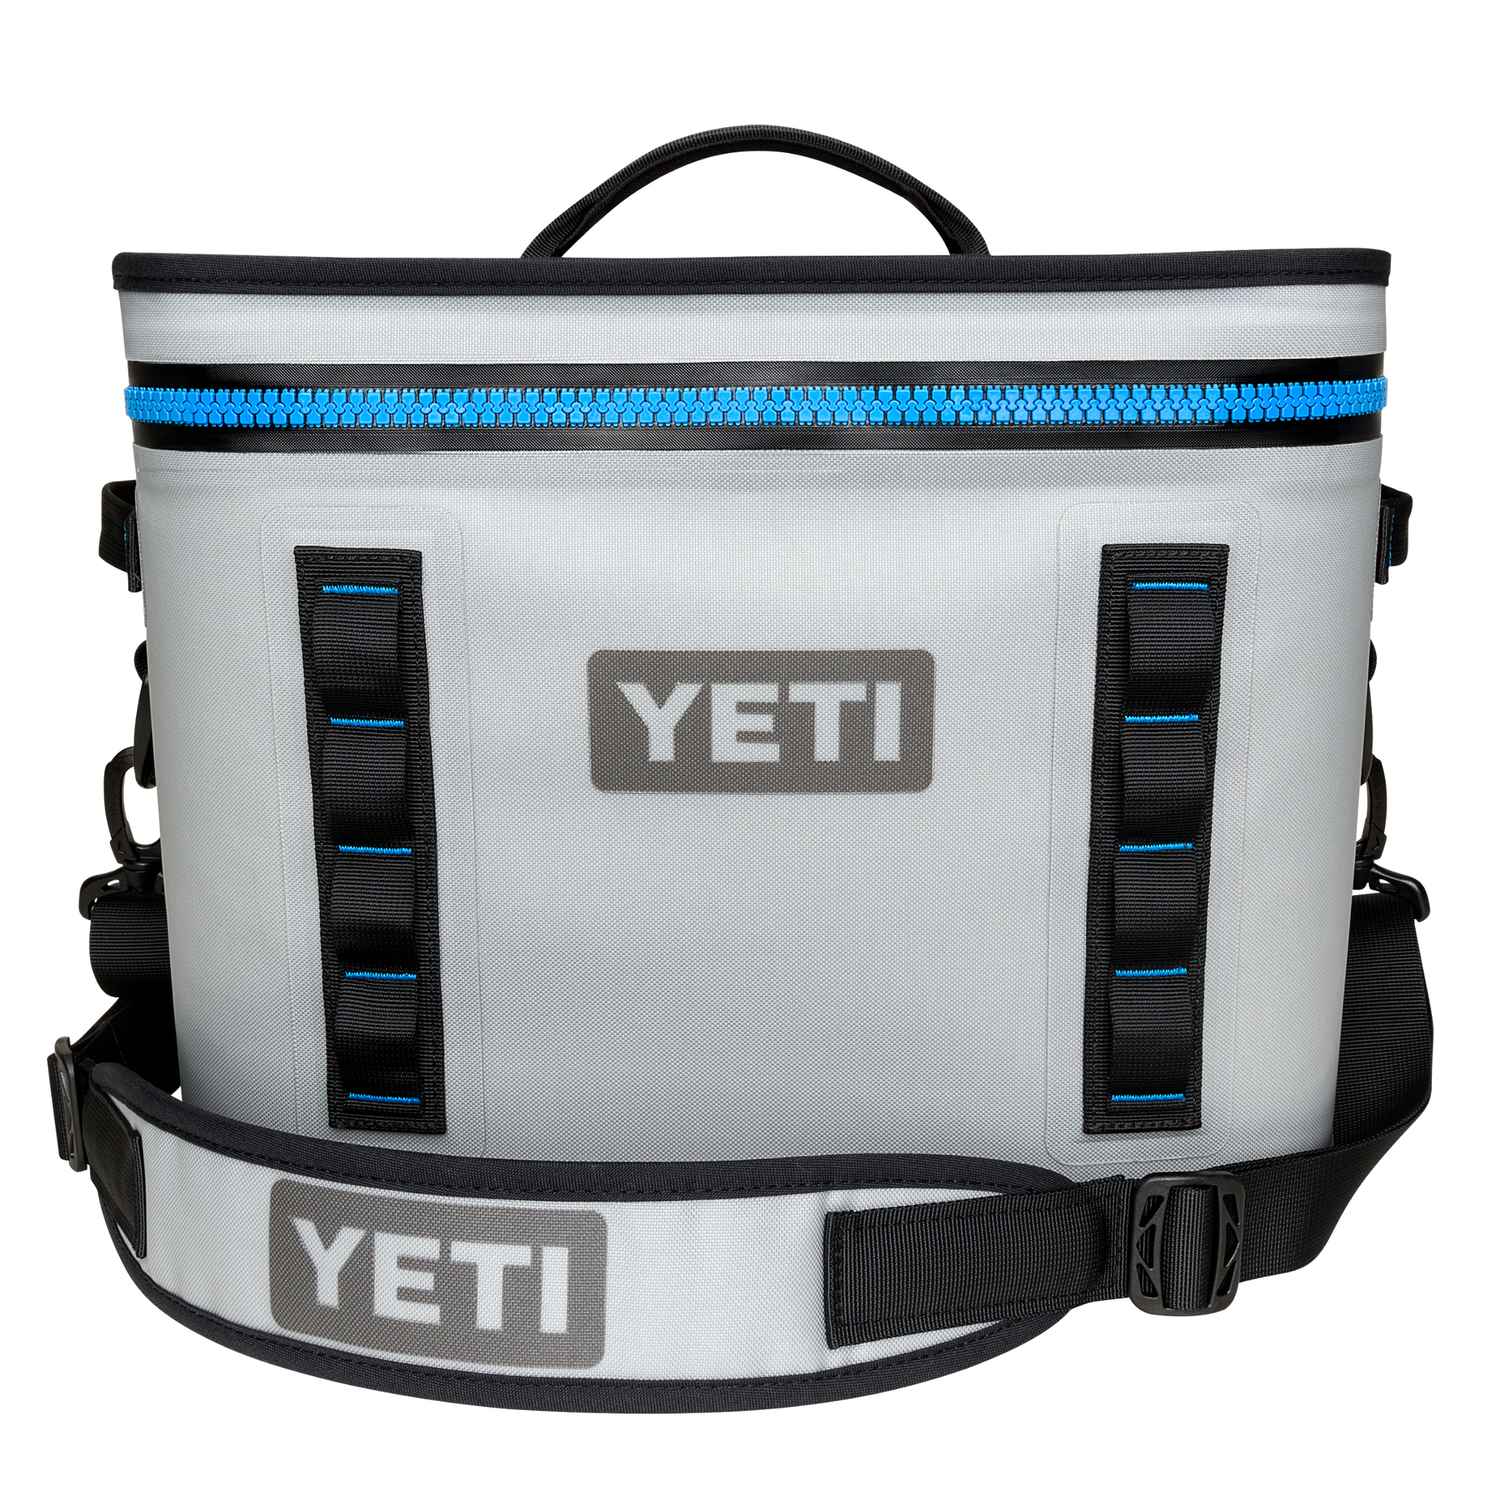 YETI Hopper M30 2.0 Cooler (Limited Edition Nordic Blue)